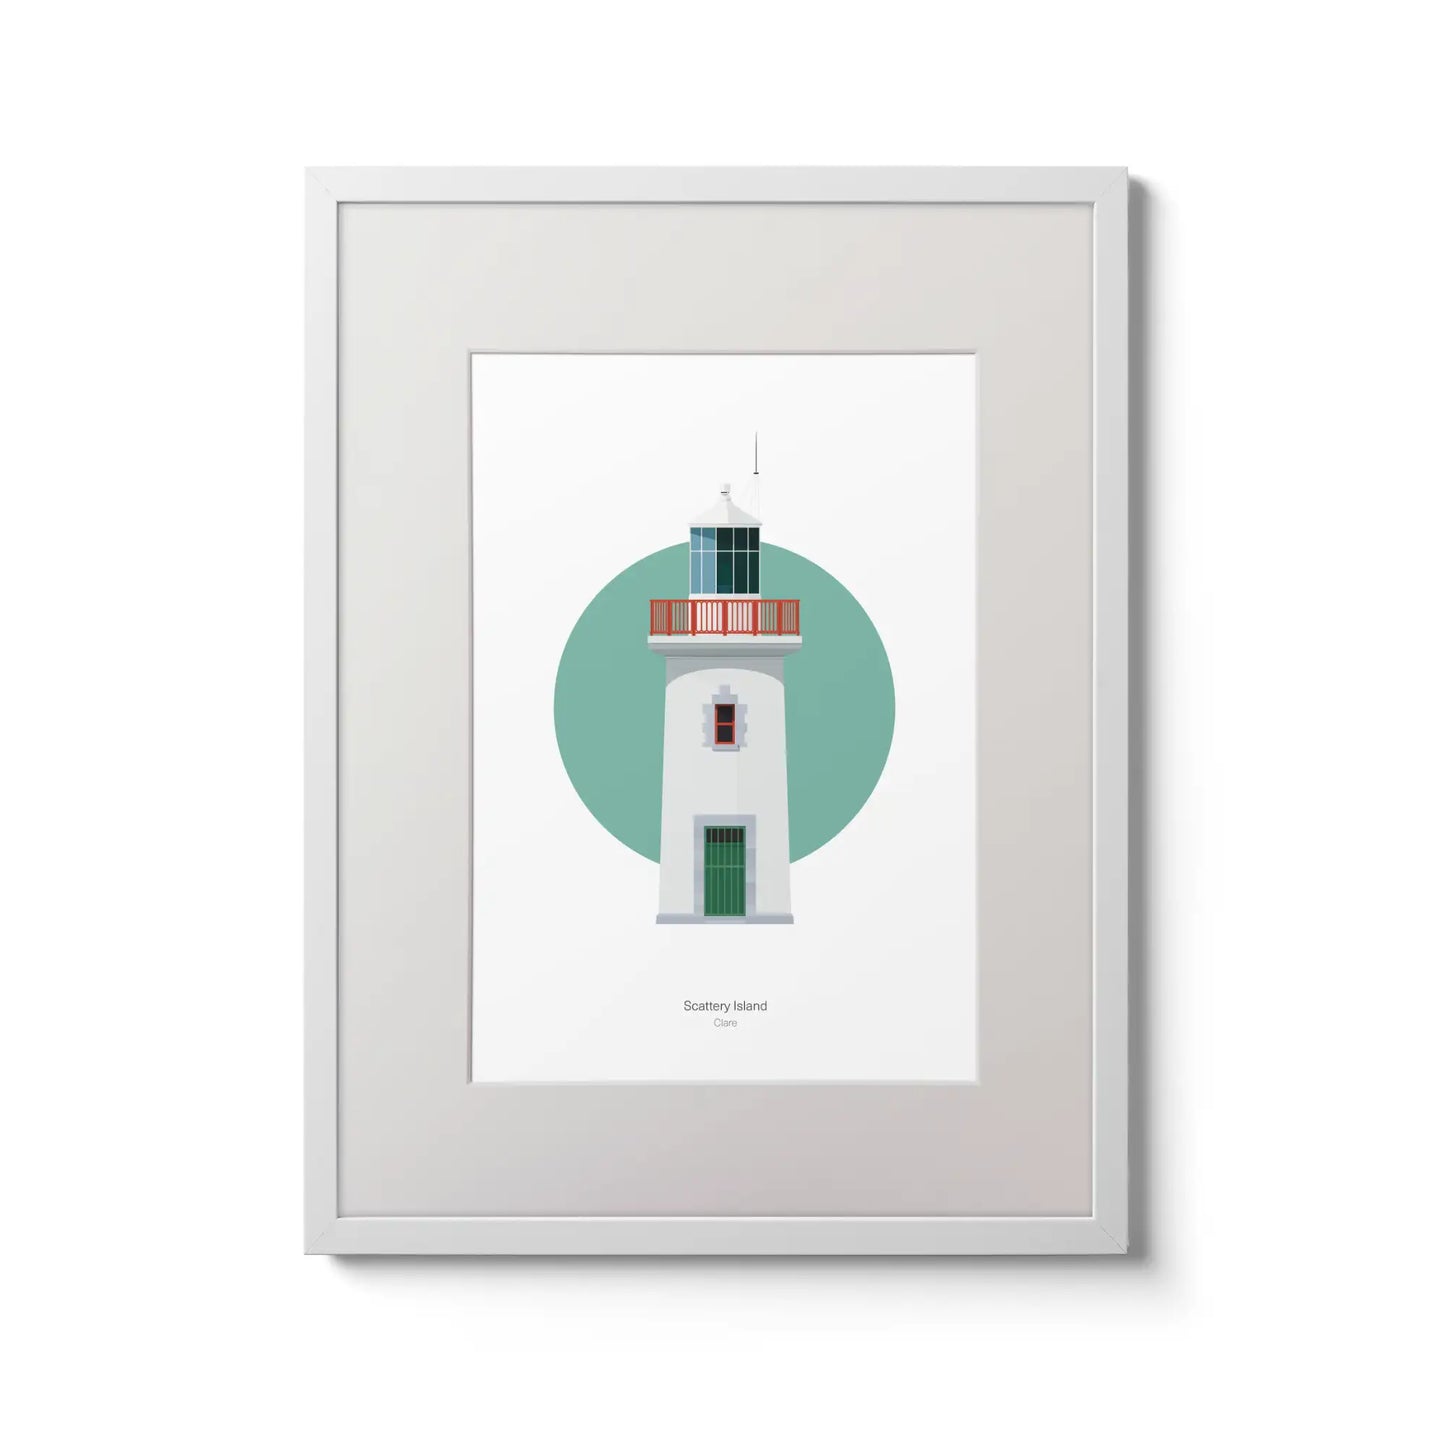 Contemporary wall art decor of Scattery Island lighthouse on a white background inside light blue square,  in a white frame measuring 30x40cm.